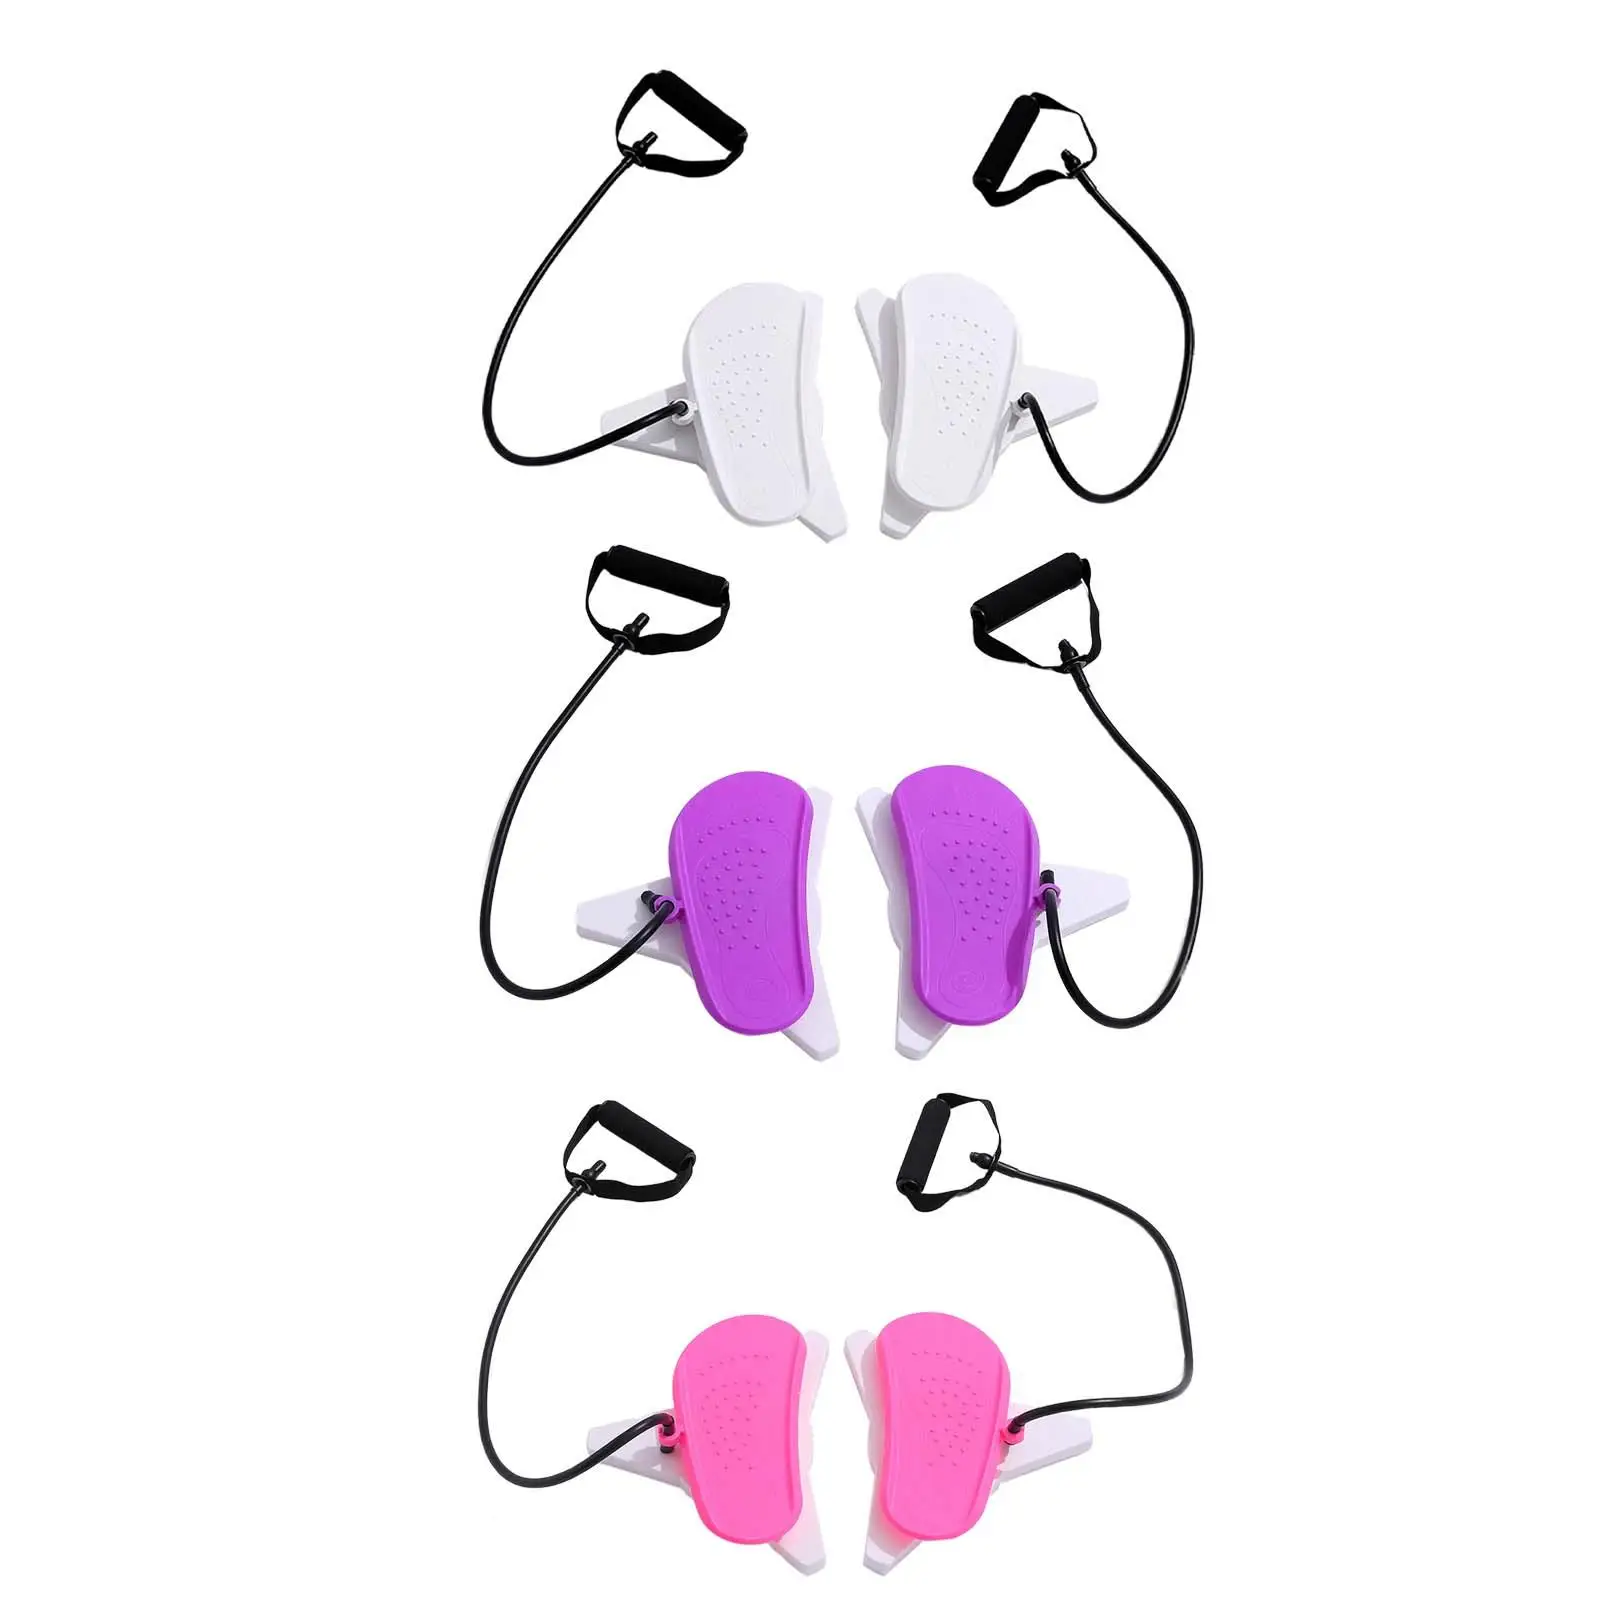 Split Twist Discs Multifunctional Shoulder Back Arms Hips Legs Low Noise with Pull Rope Waist Twist Disc Aerobic Exercise